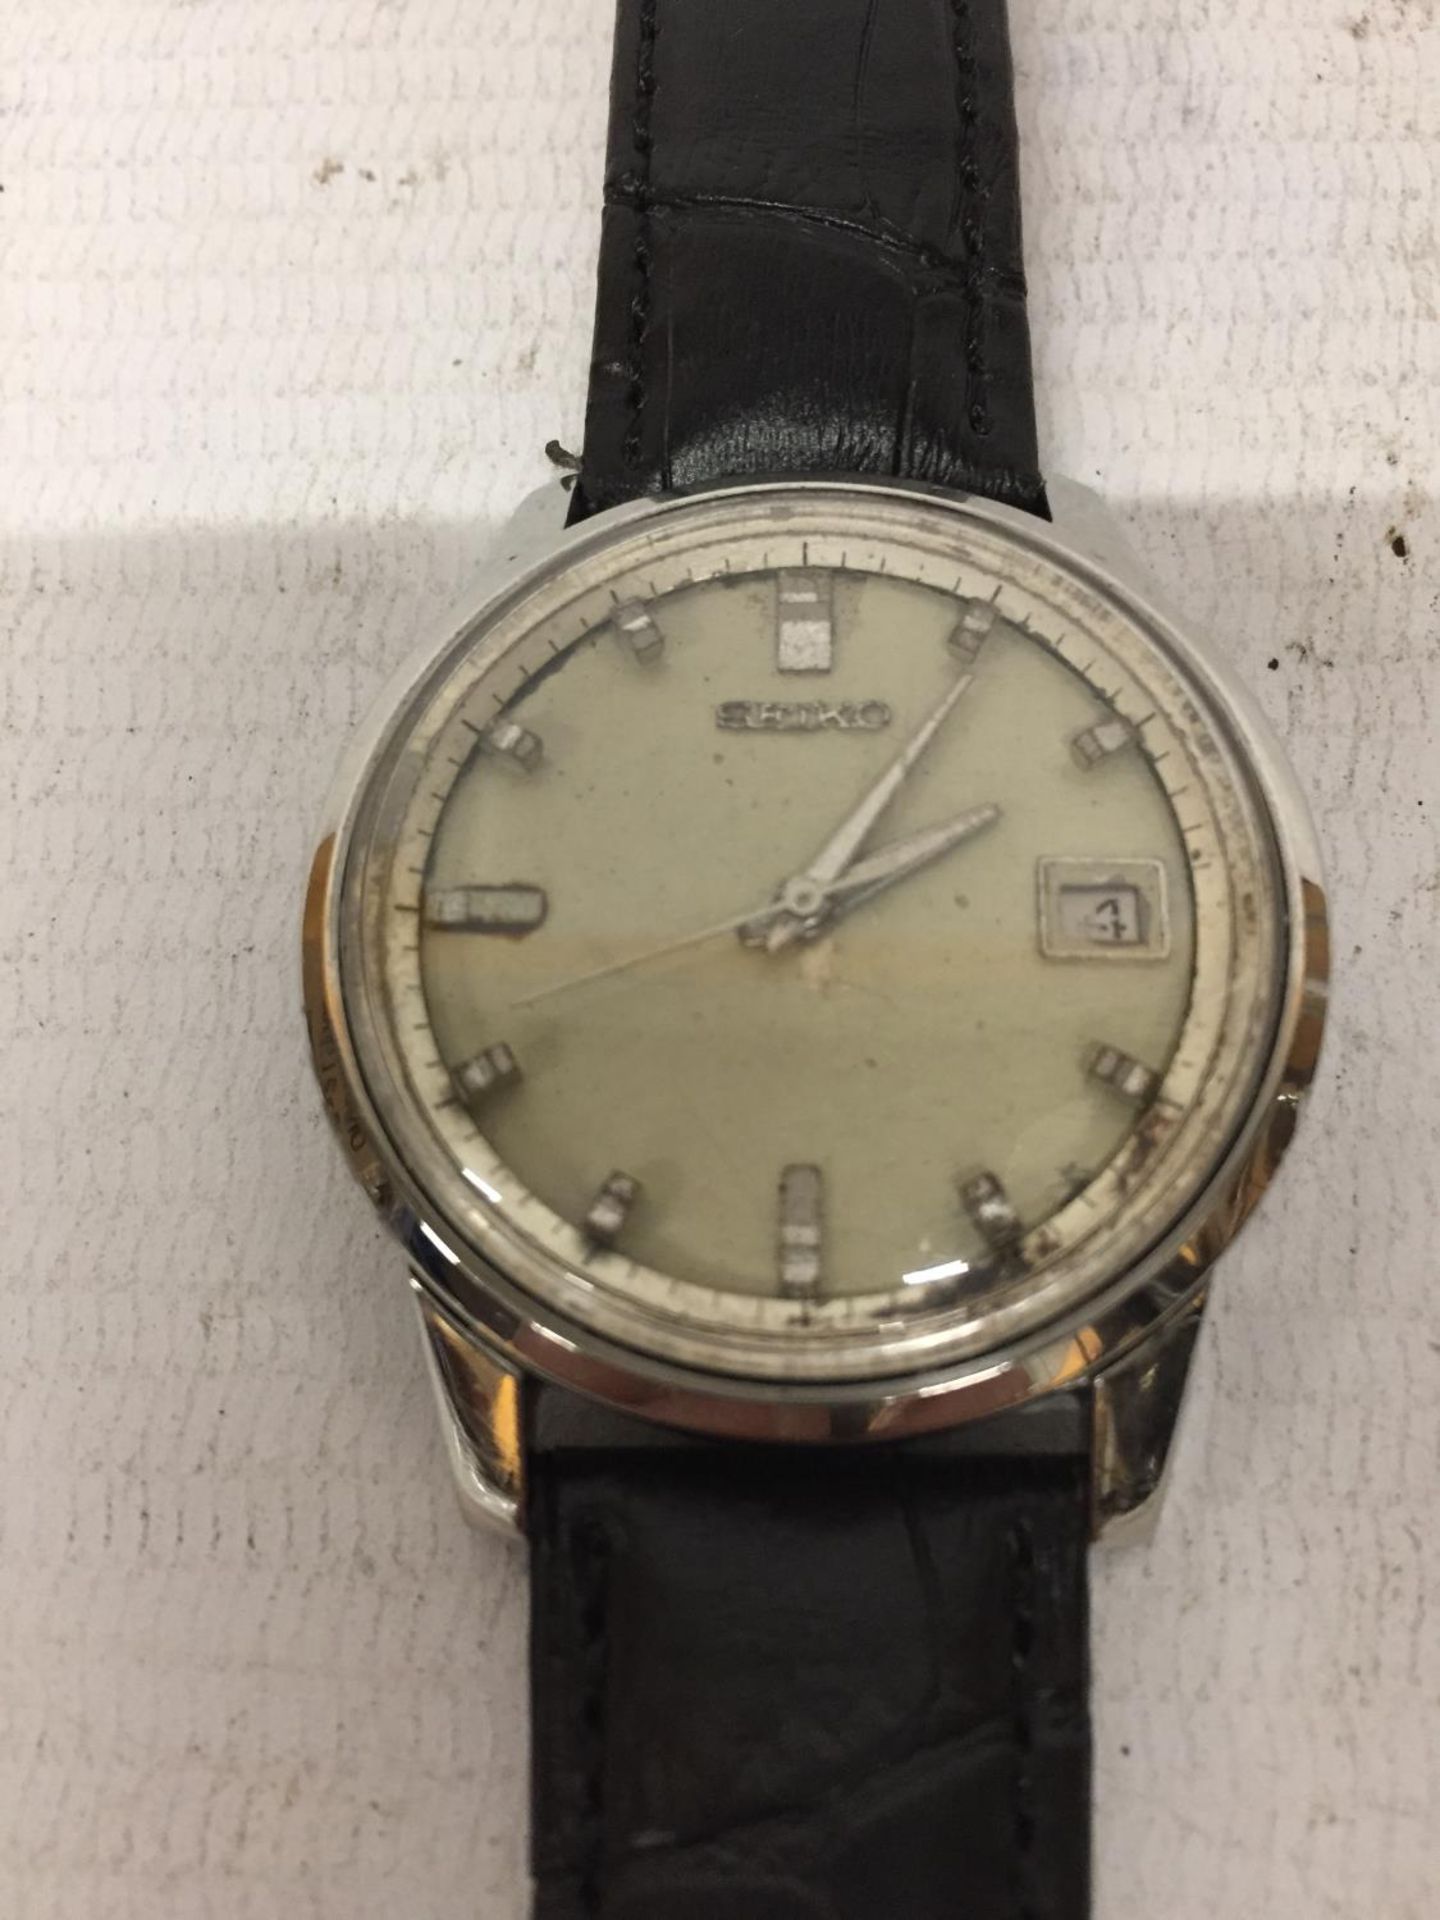 A VINTAGE SEIKO SPORTSMATIC AUTOMATIC WRISTWATCH 7625-8060 SEEN WORKING BUT NO WARRANTY - Image 2 of 3